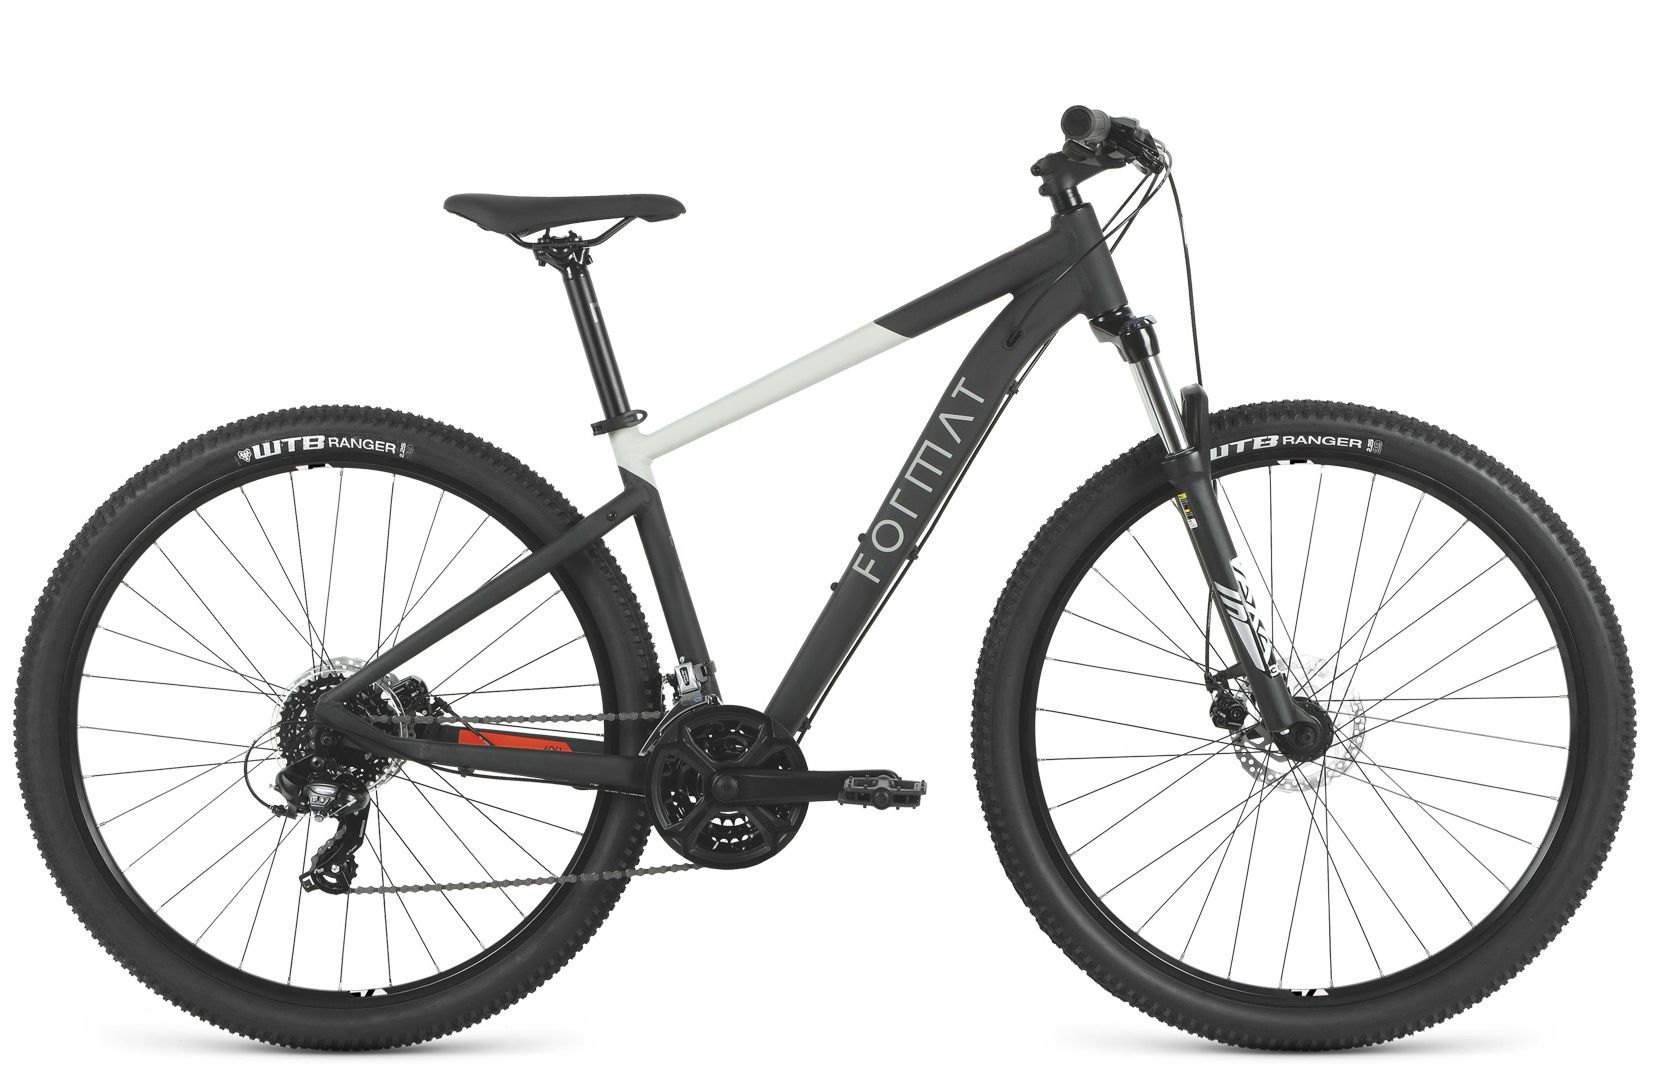 Электровелосипед specialized Turbo levo. Format 1415 27.5. Altair MTB HT 26 2.0 D. Велосипед format 1415 27.5 (2021).